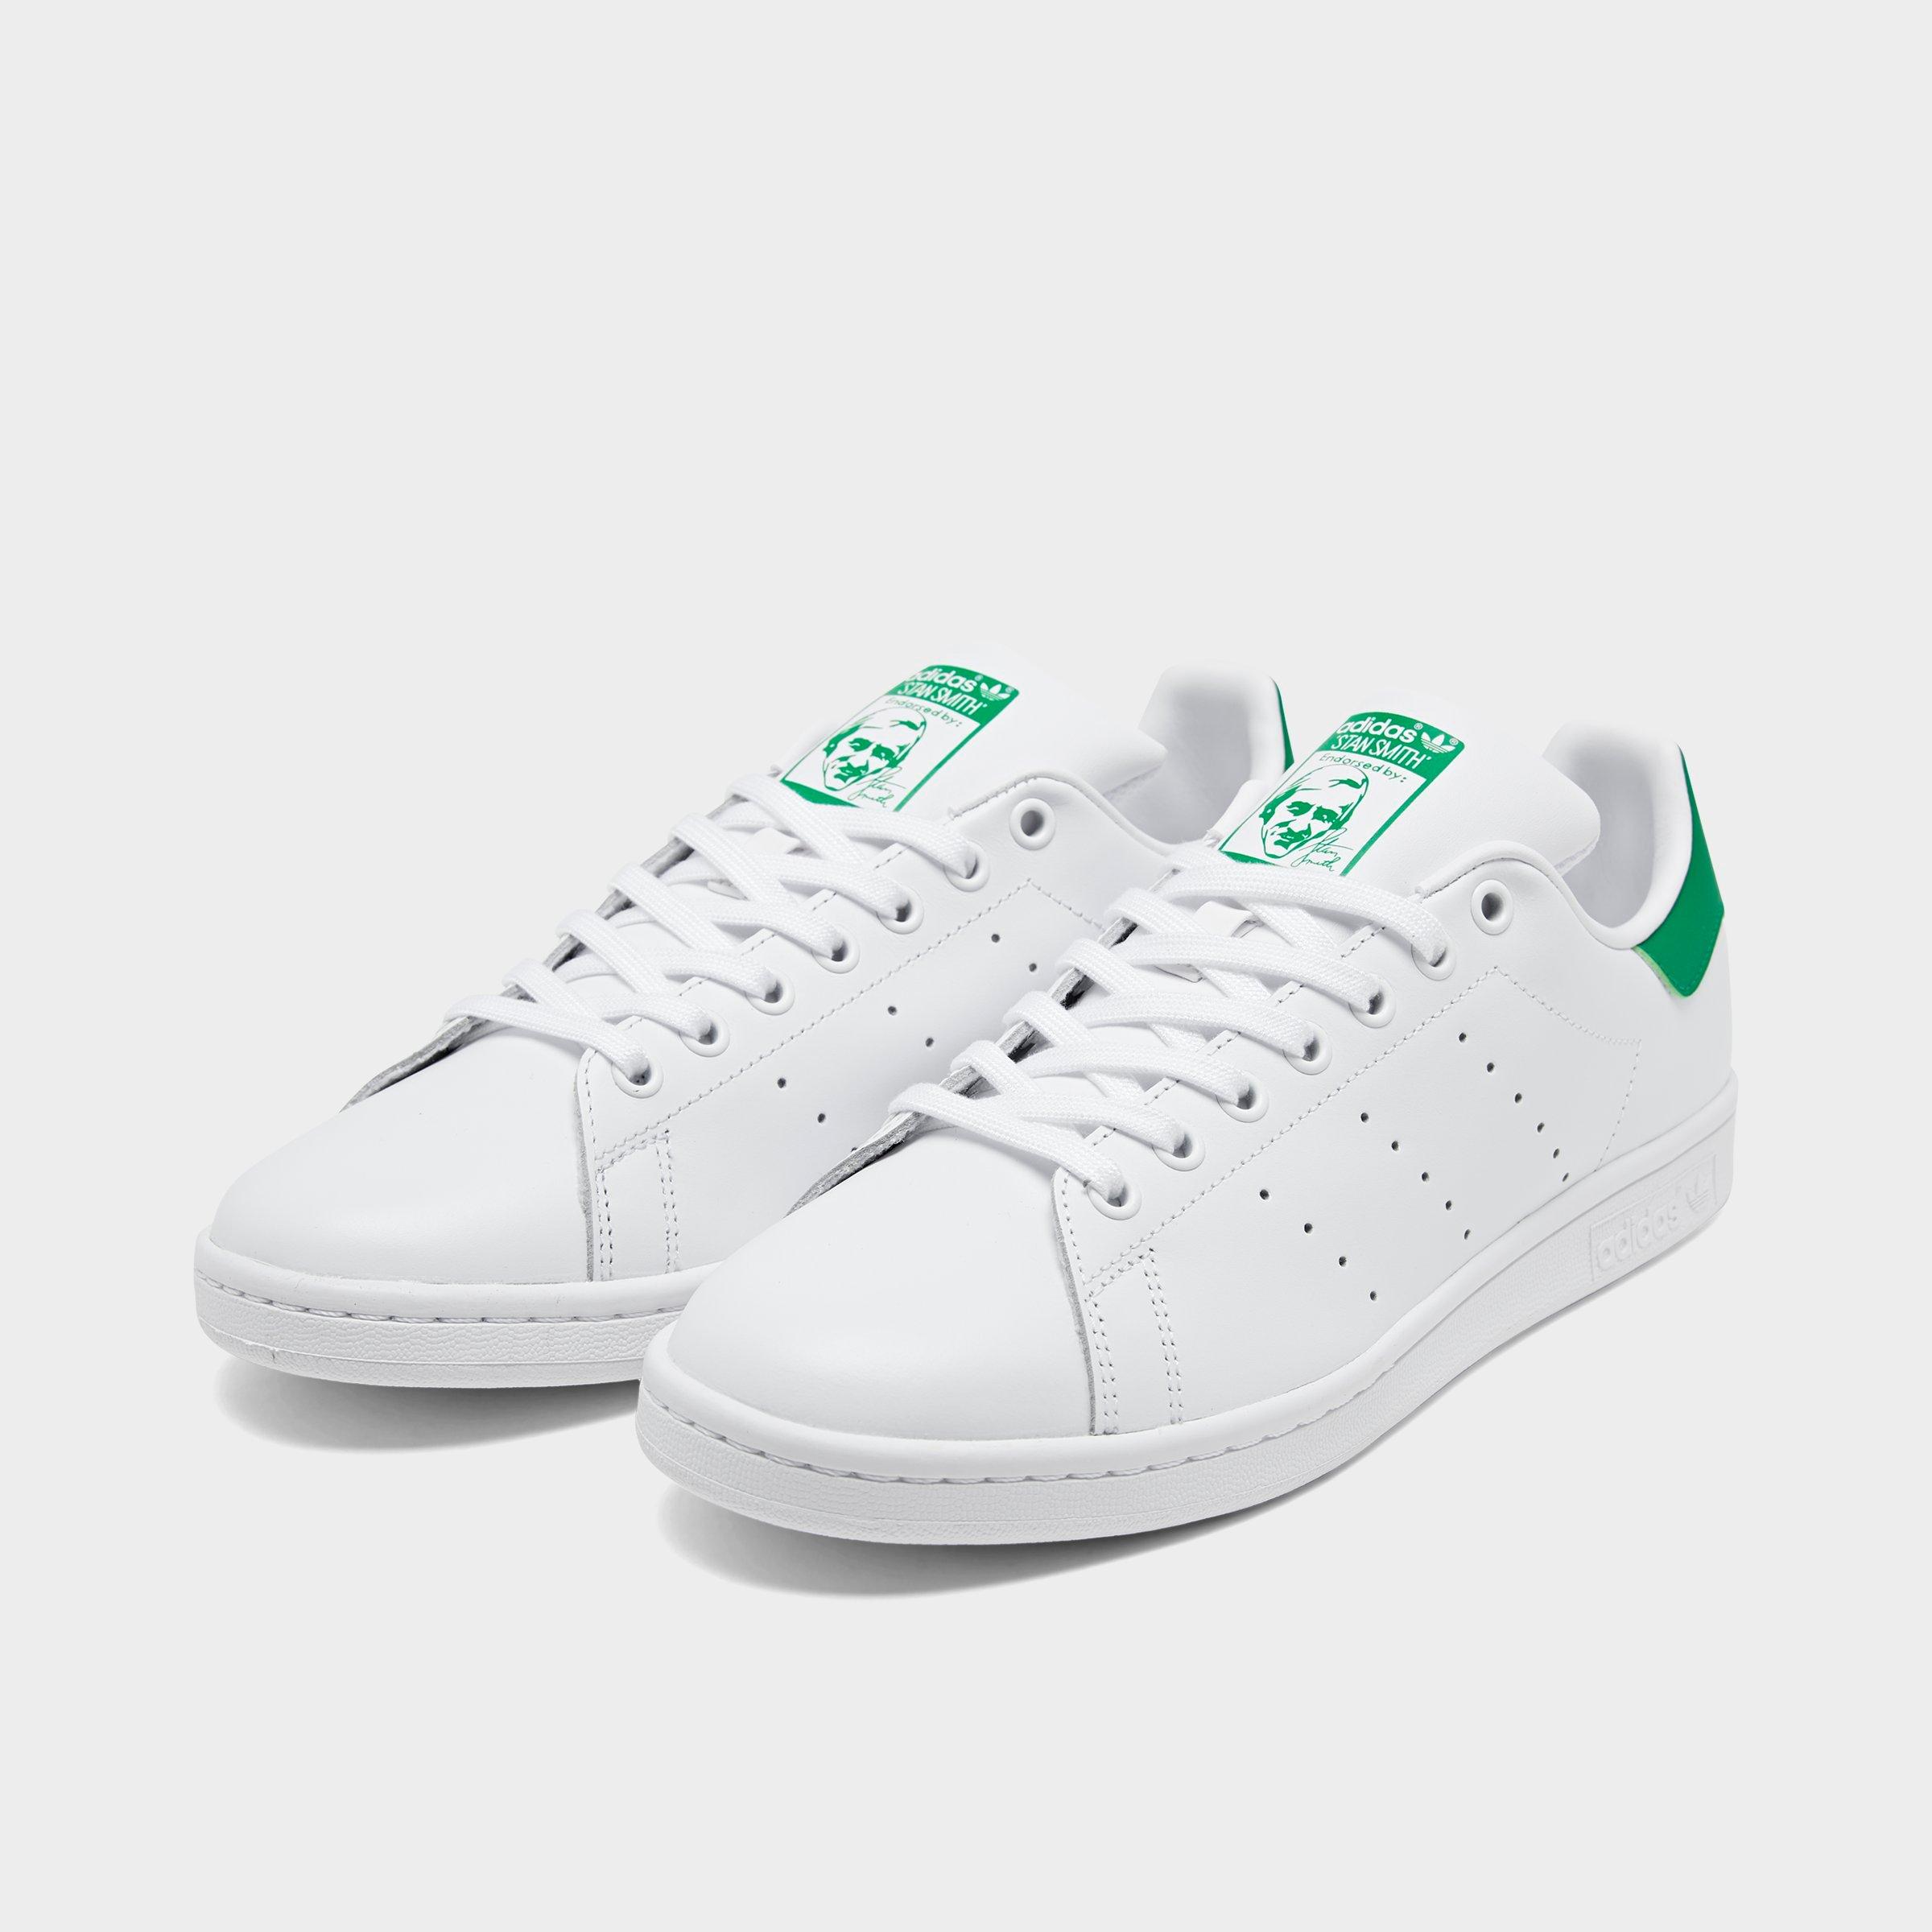 stan smith shoes white and green